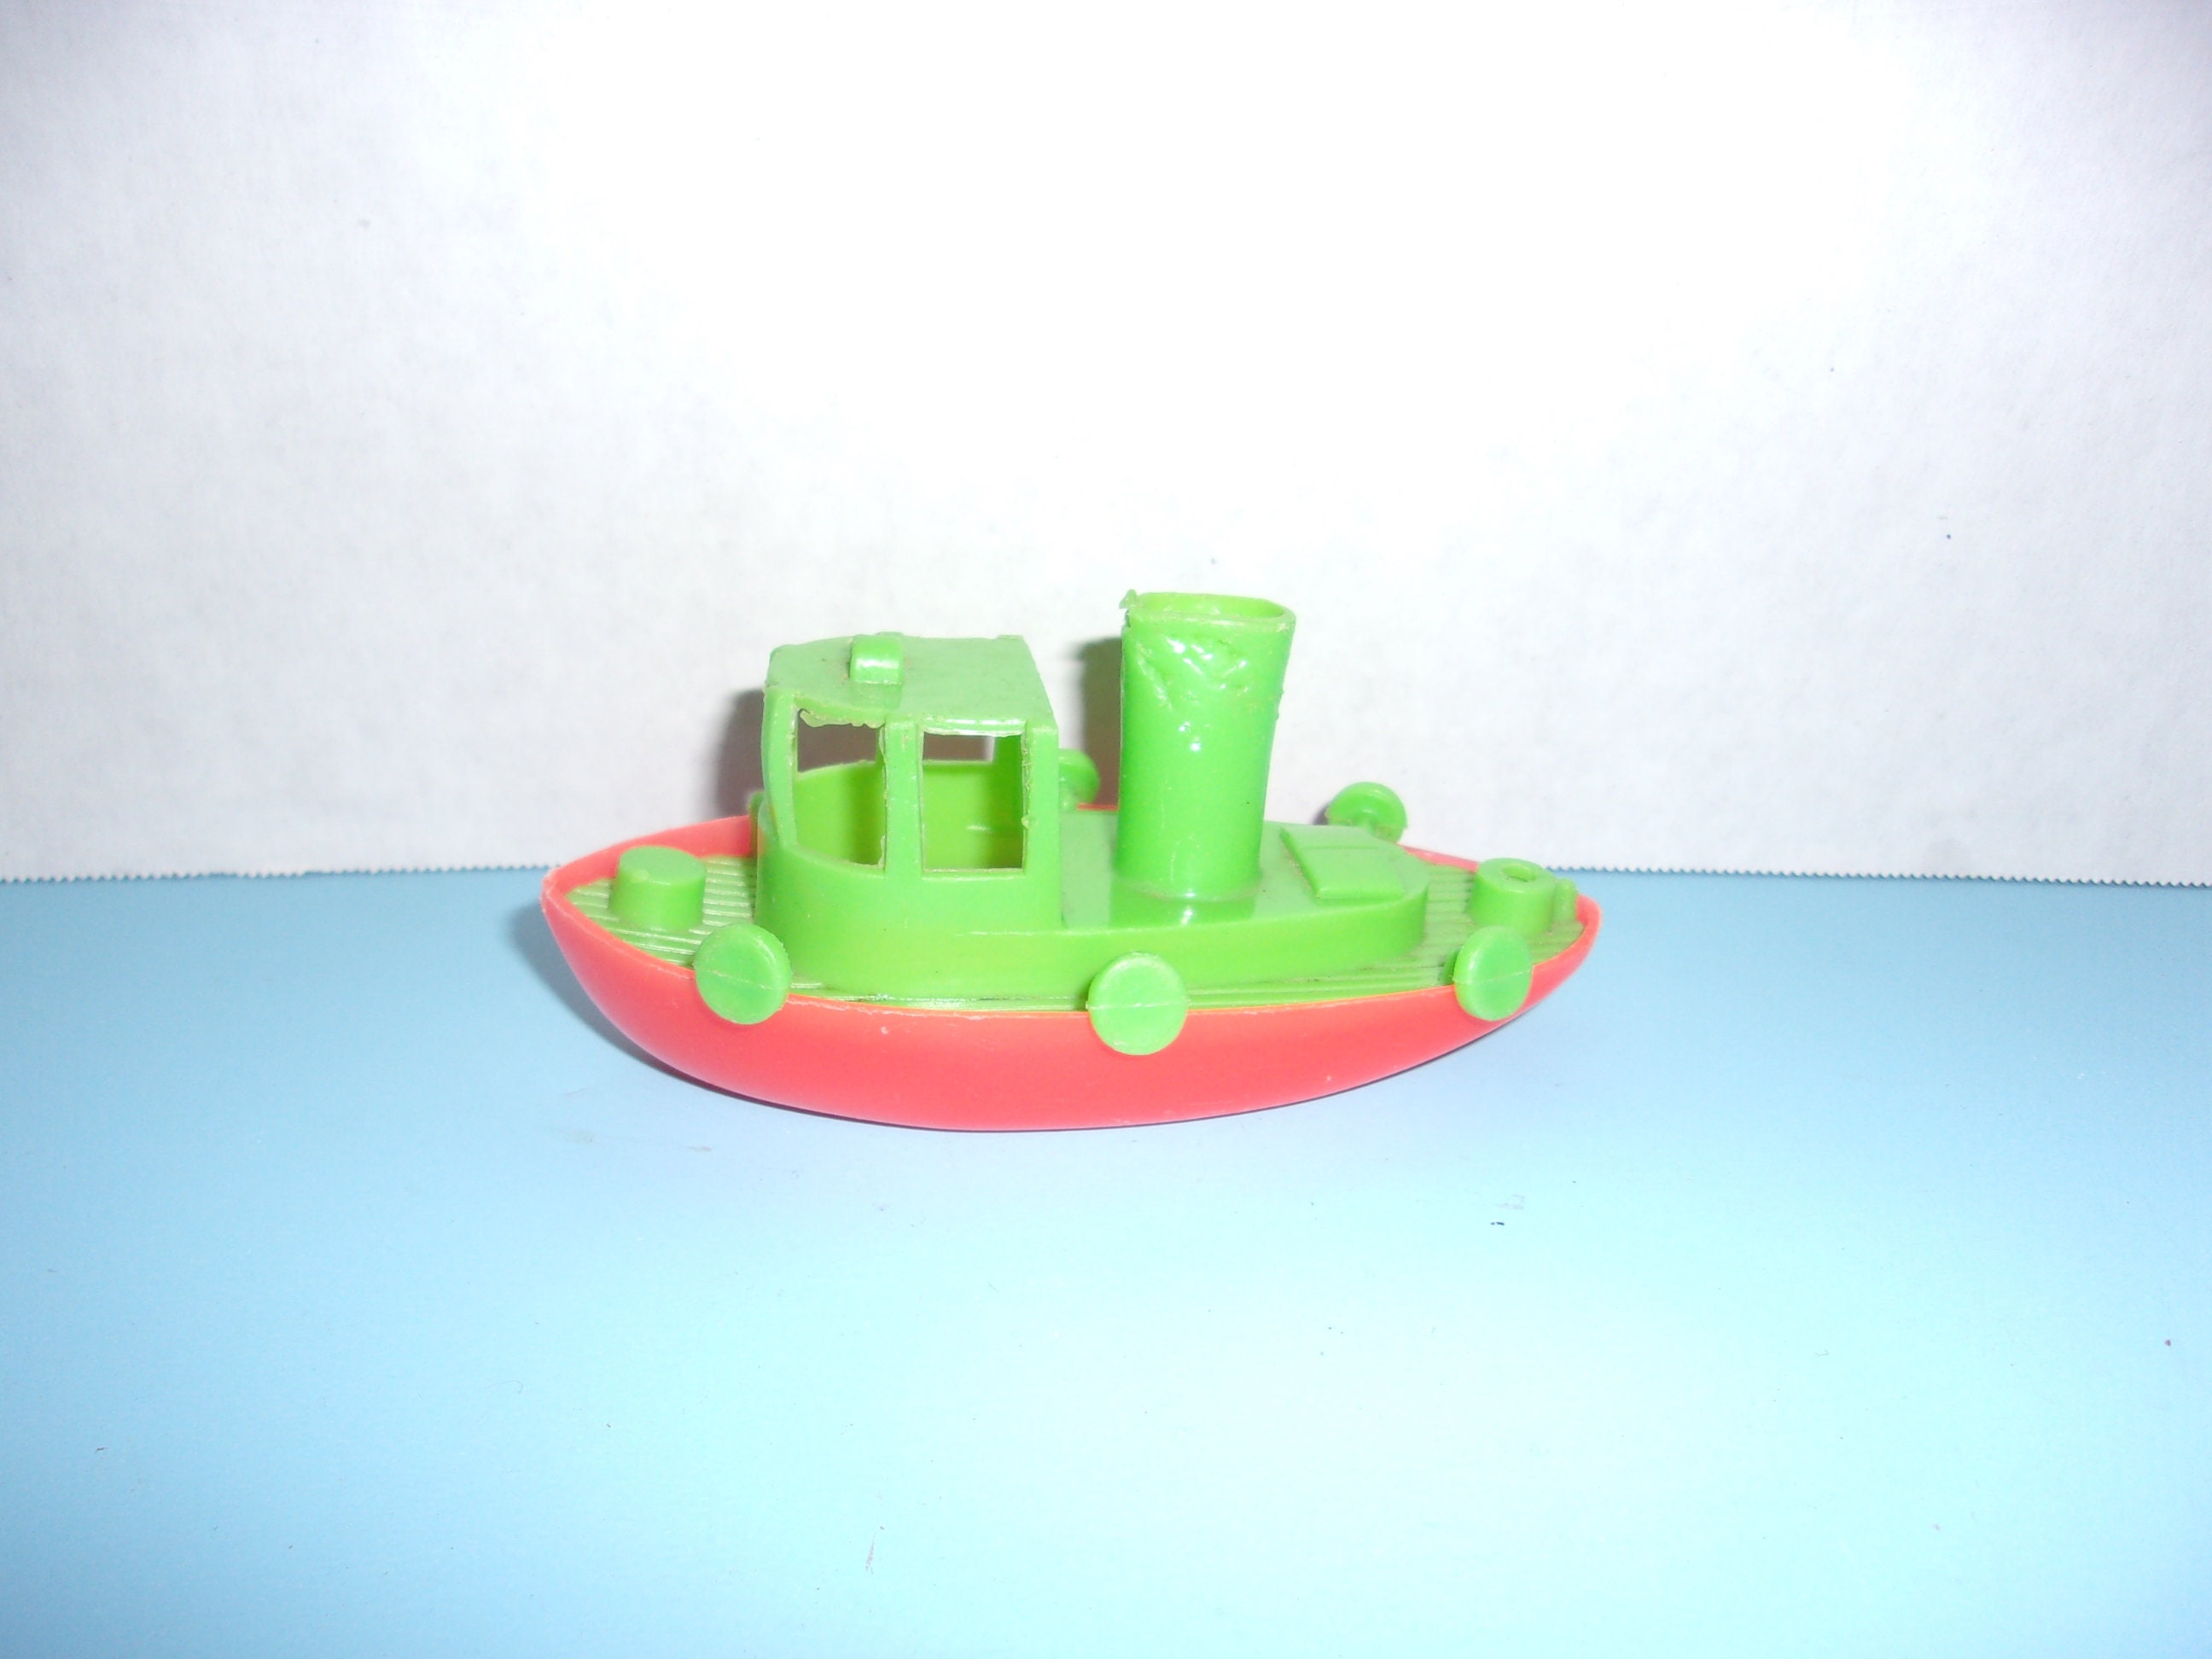 Vintage 1950's-60's Plastic Tugboat Toy, Made in USA, Green and Orange,  Retro Toy 